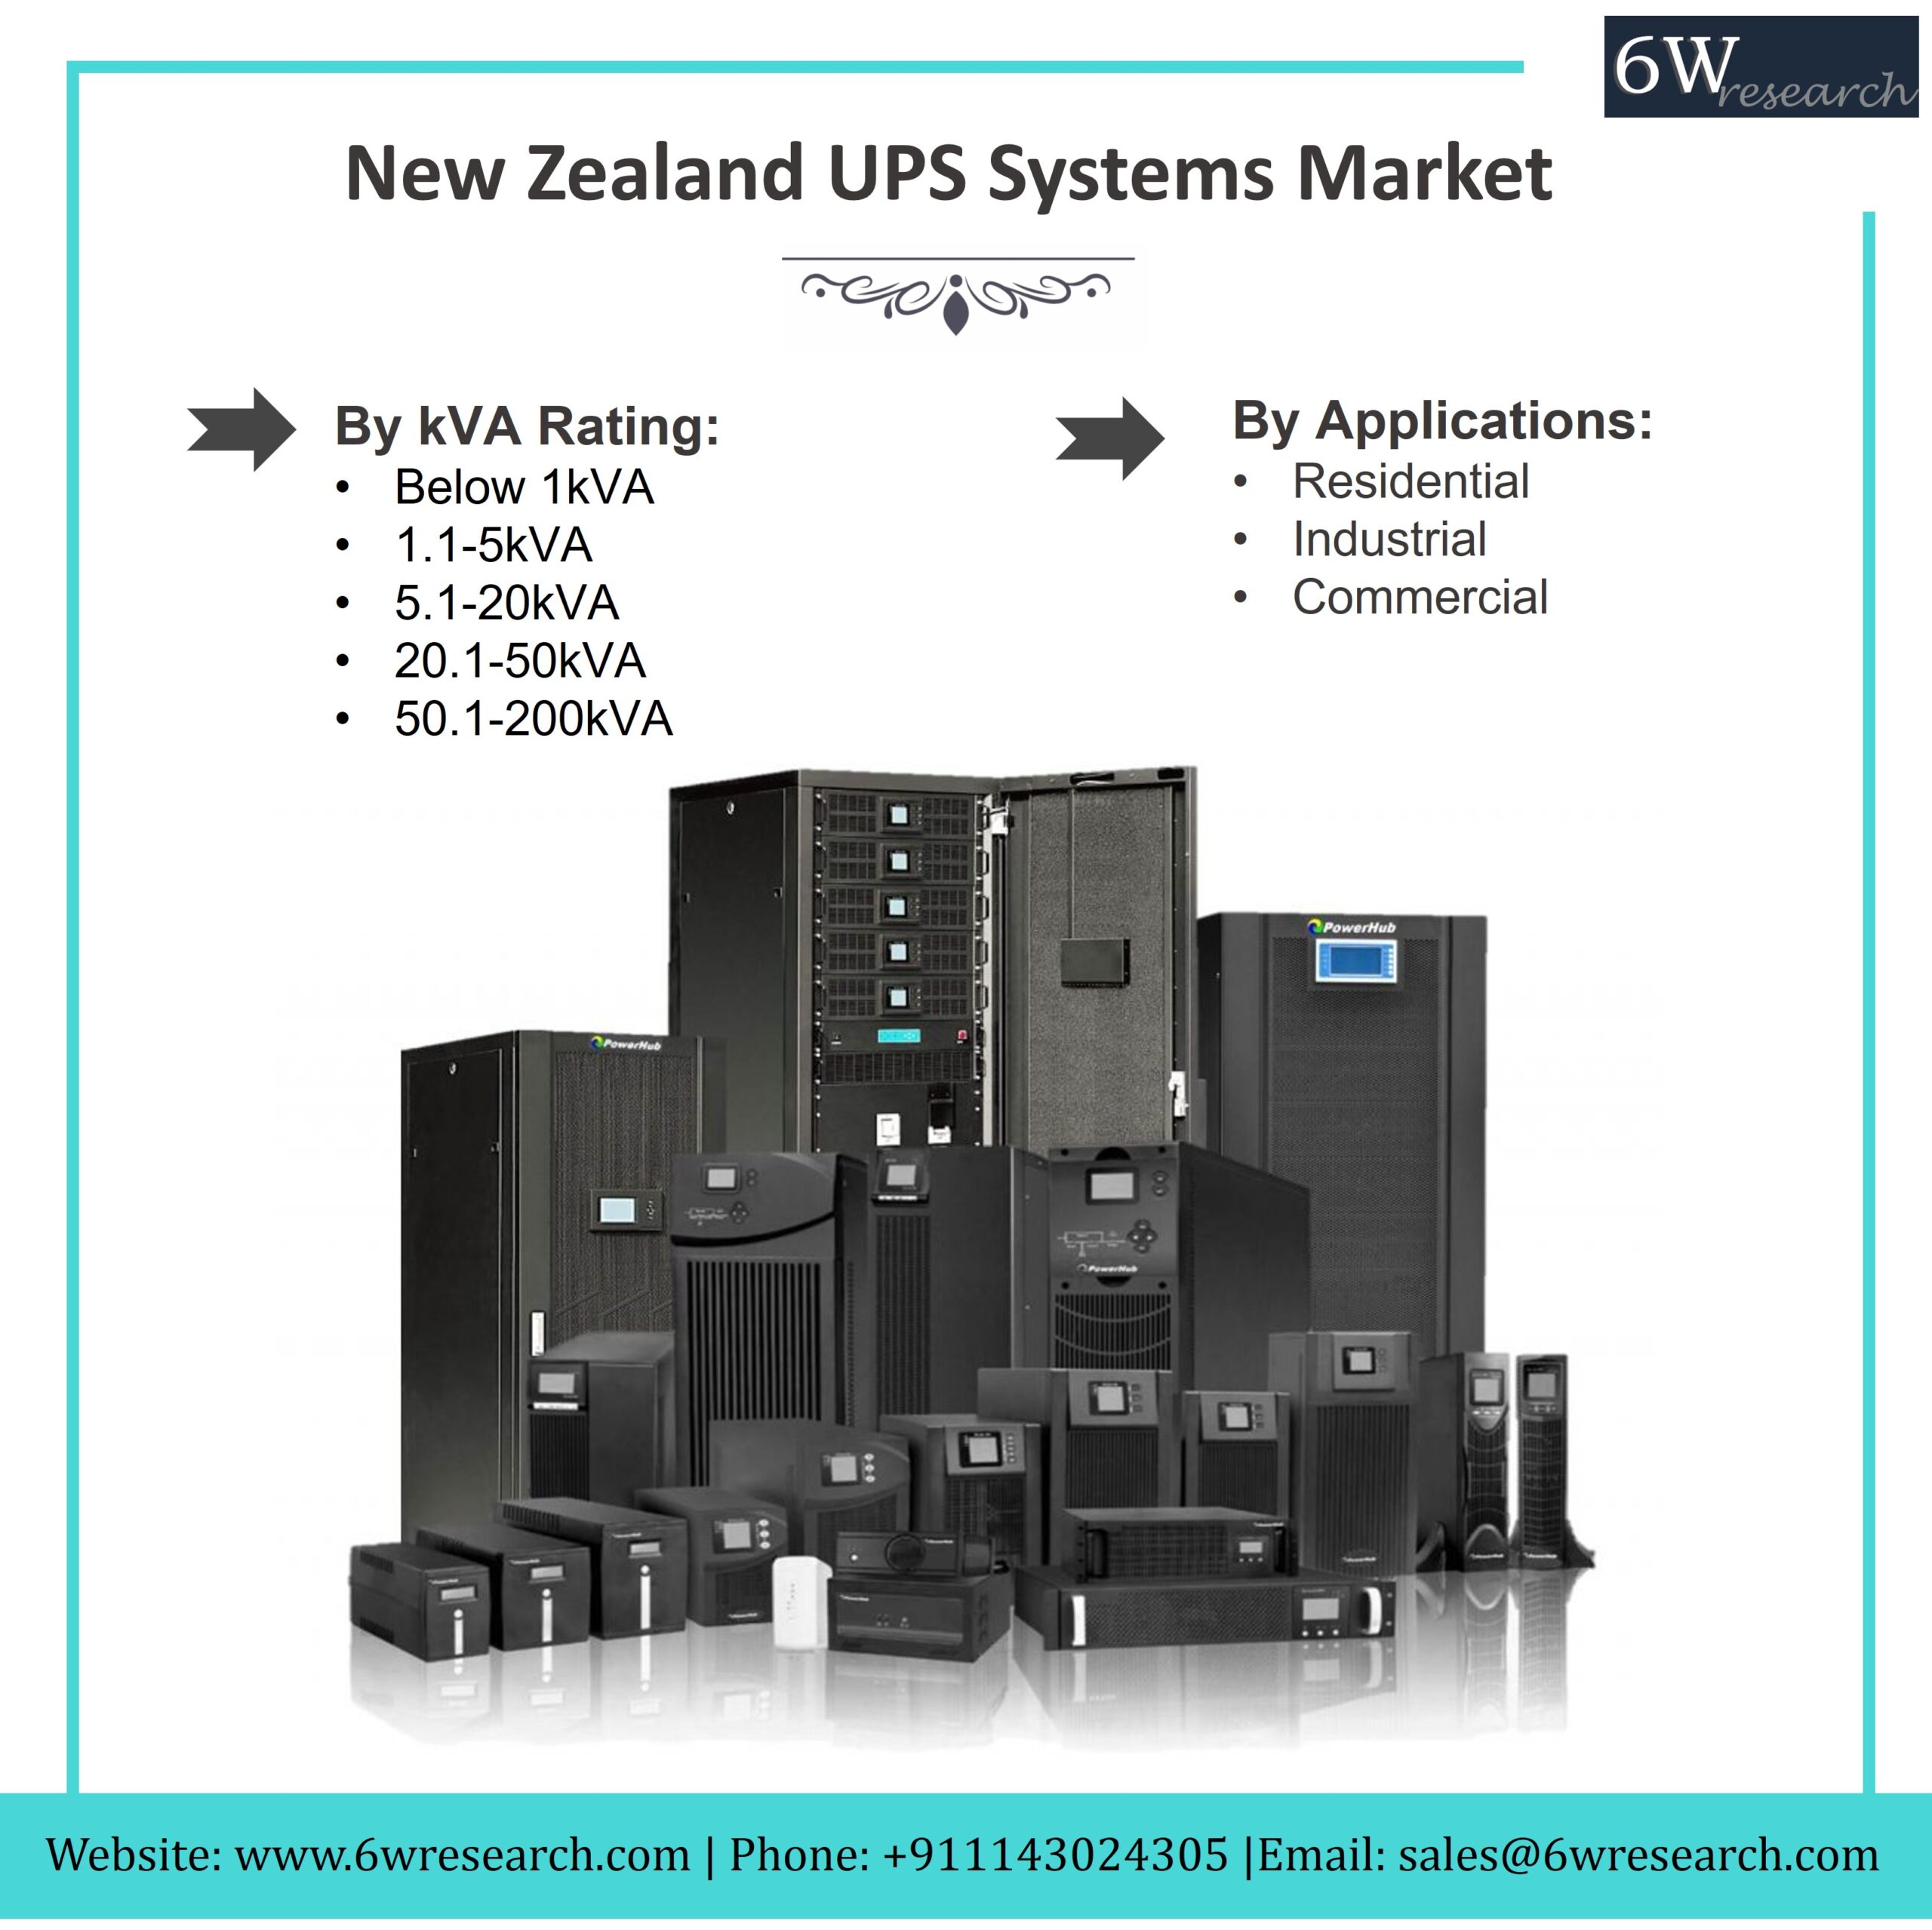 New Zealand UPS Systems Market (2022-2028) | Drivers, Trends, Analysis & Forecast – 6Wresearch